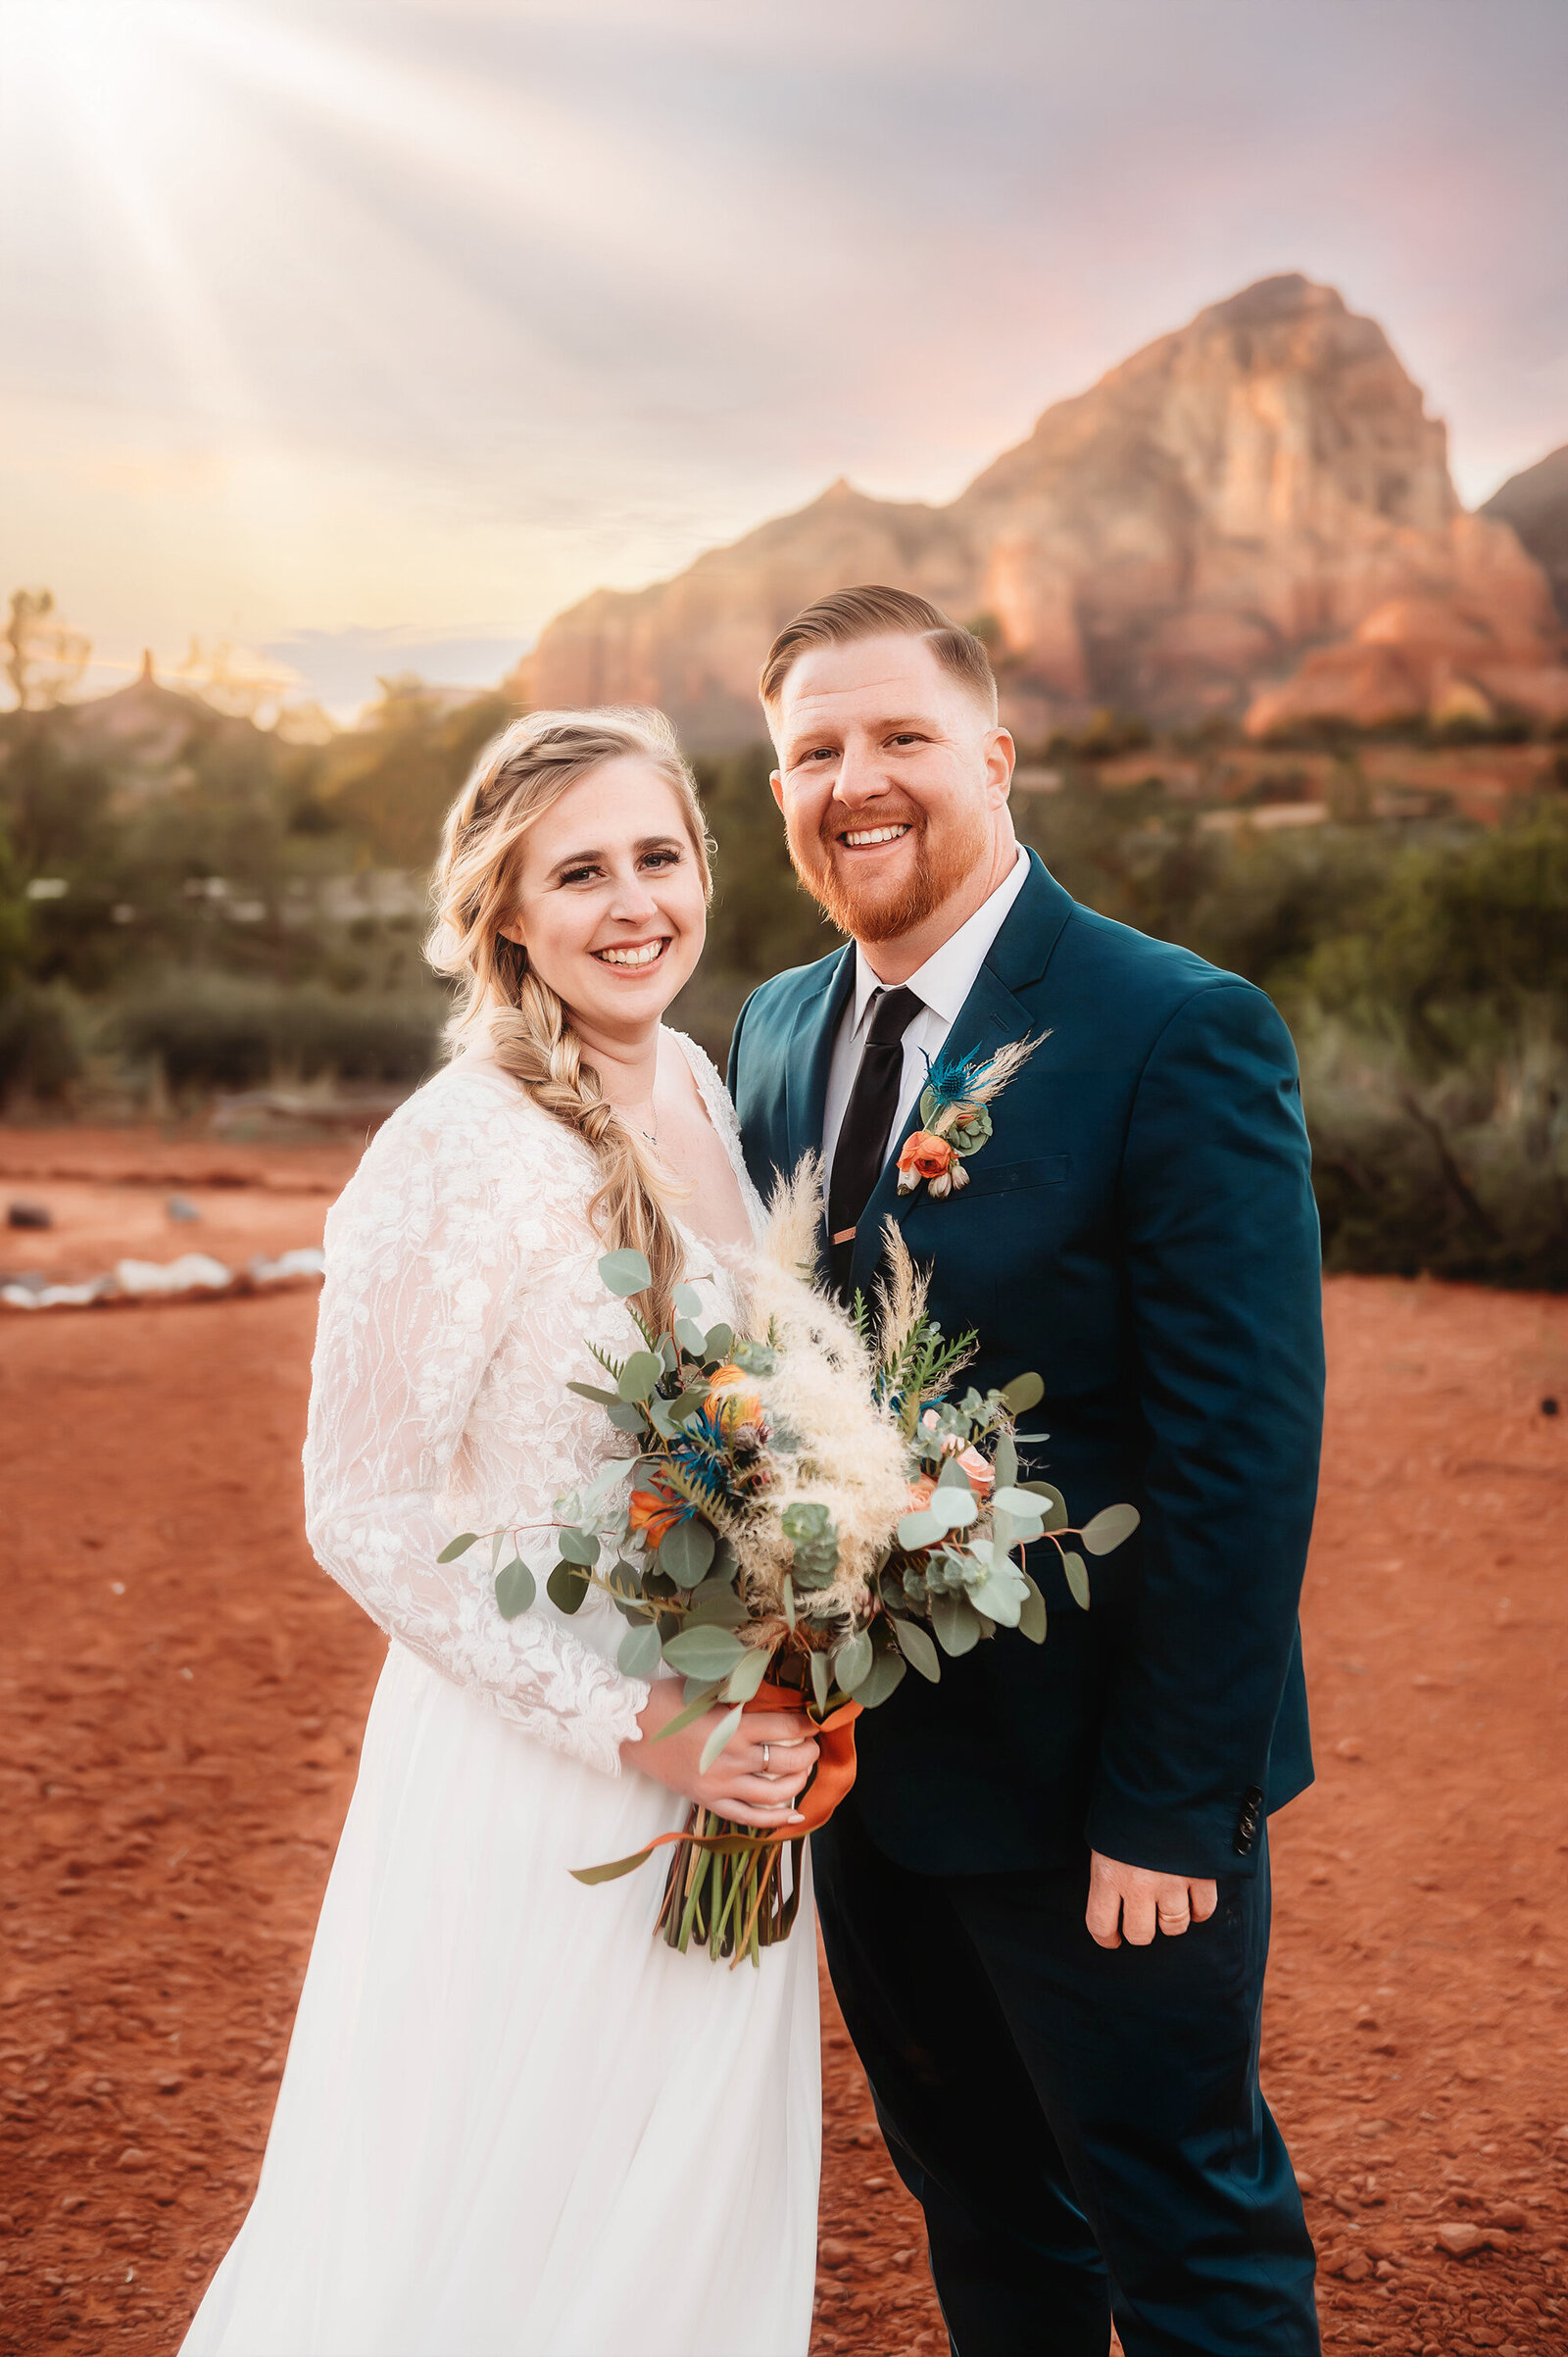 Bride & Groom pose for newlywed portraits after their Micro-Wedding in Sedona Arizona.